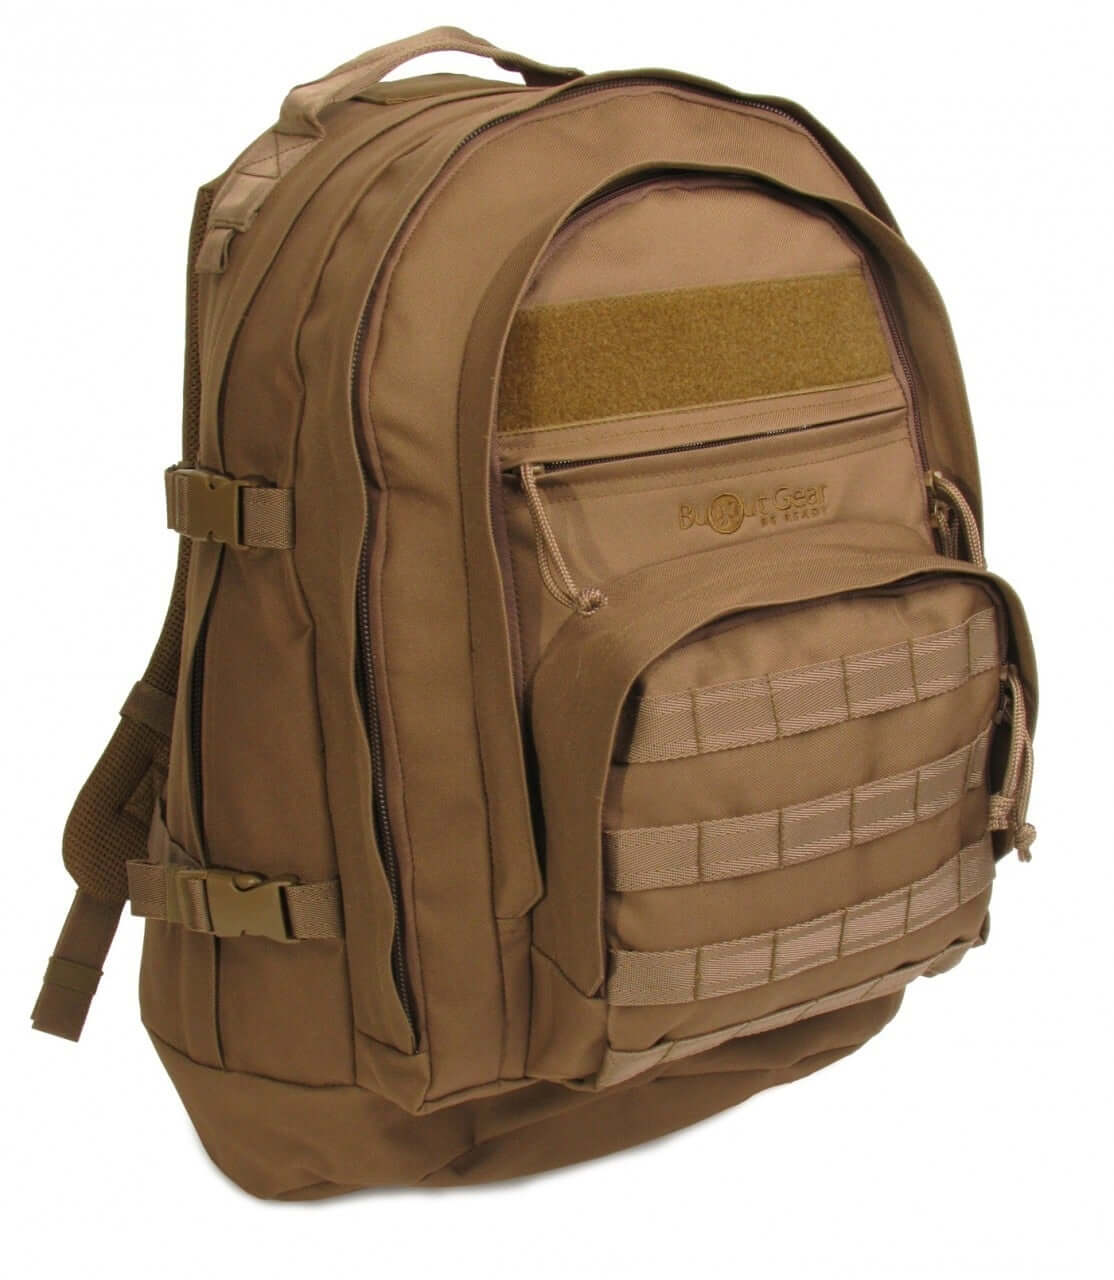 SOC Gear - Save on Luggage, Carry ons , aluminum , backpacks bugout gear  ... and More!